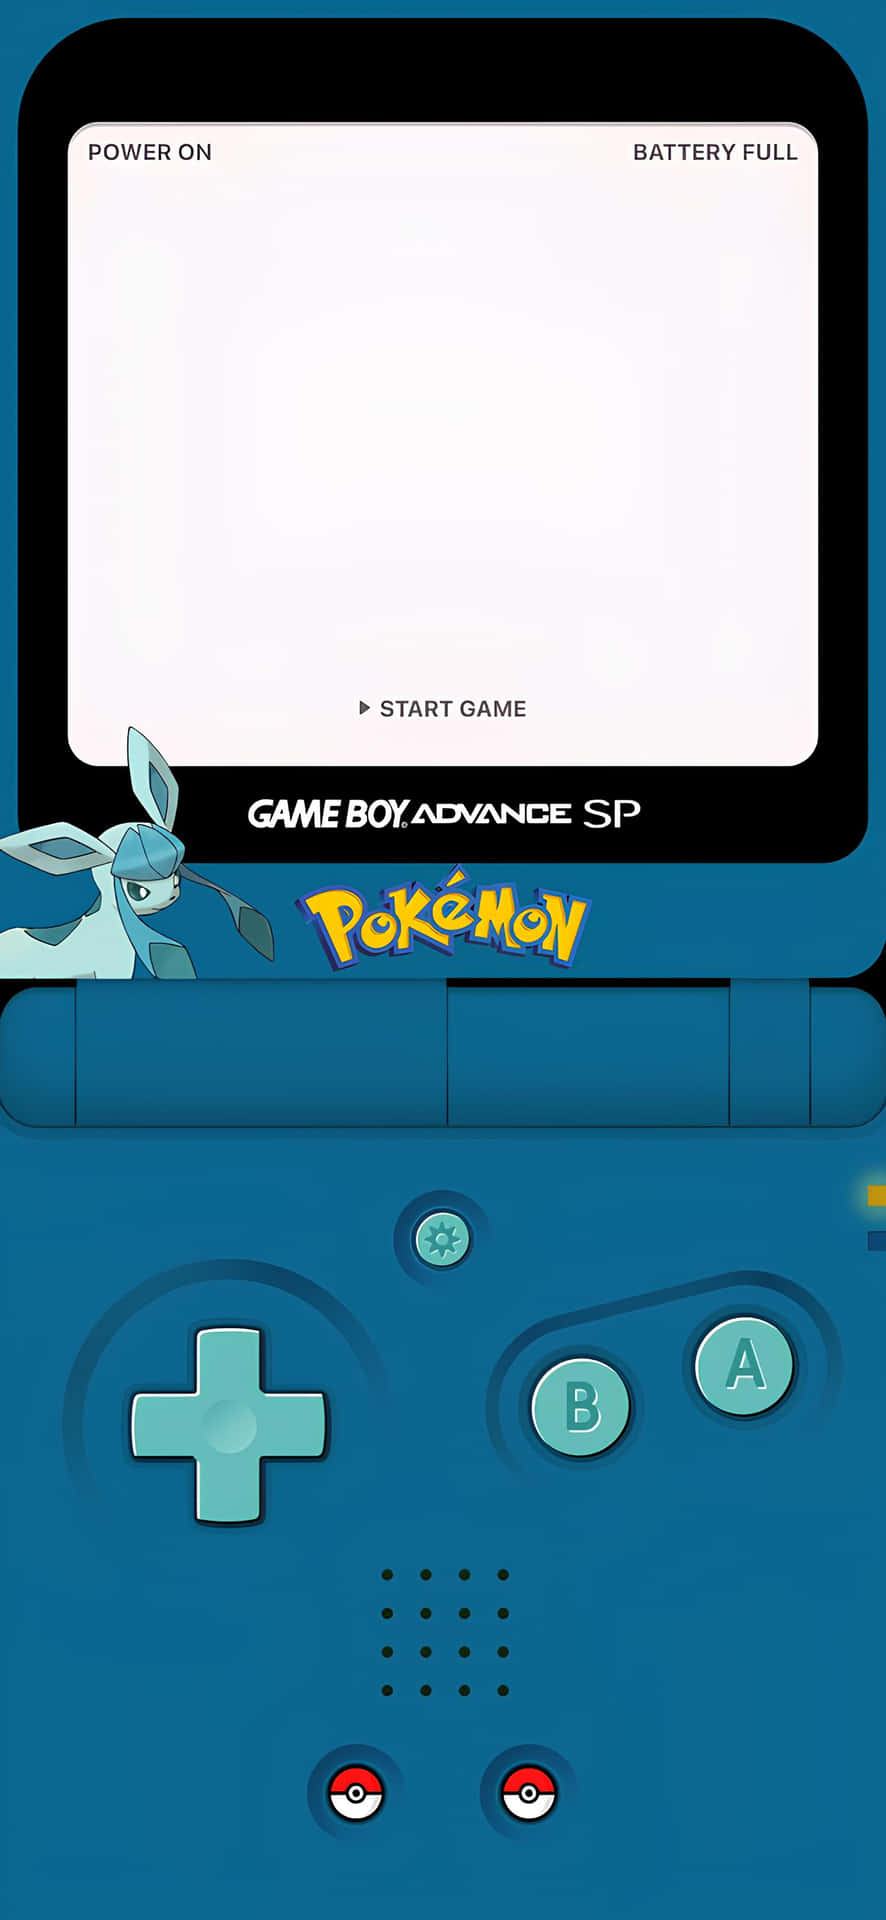 Gameboy Advance S Pi Phone Casewith Pokemon Theme Wallpaper